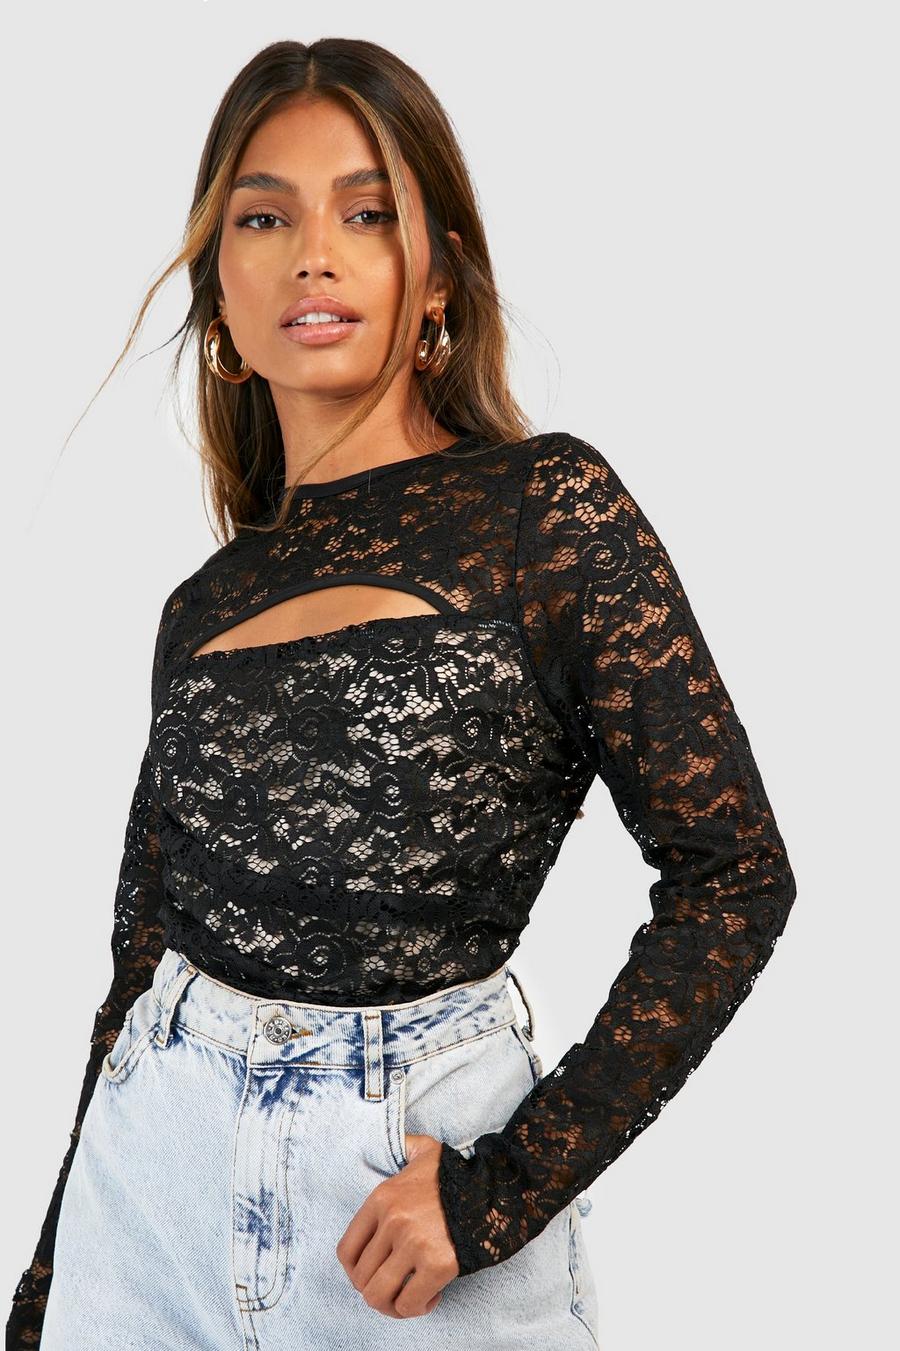 Shop Boohoo Women's Black Lace Bodysuits up to 80% Off